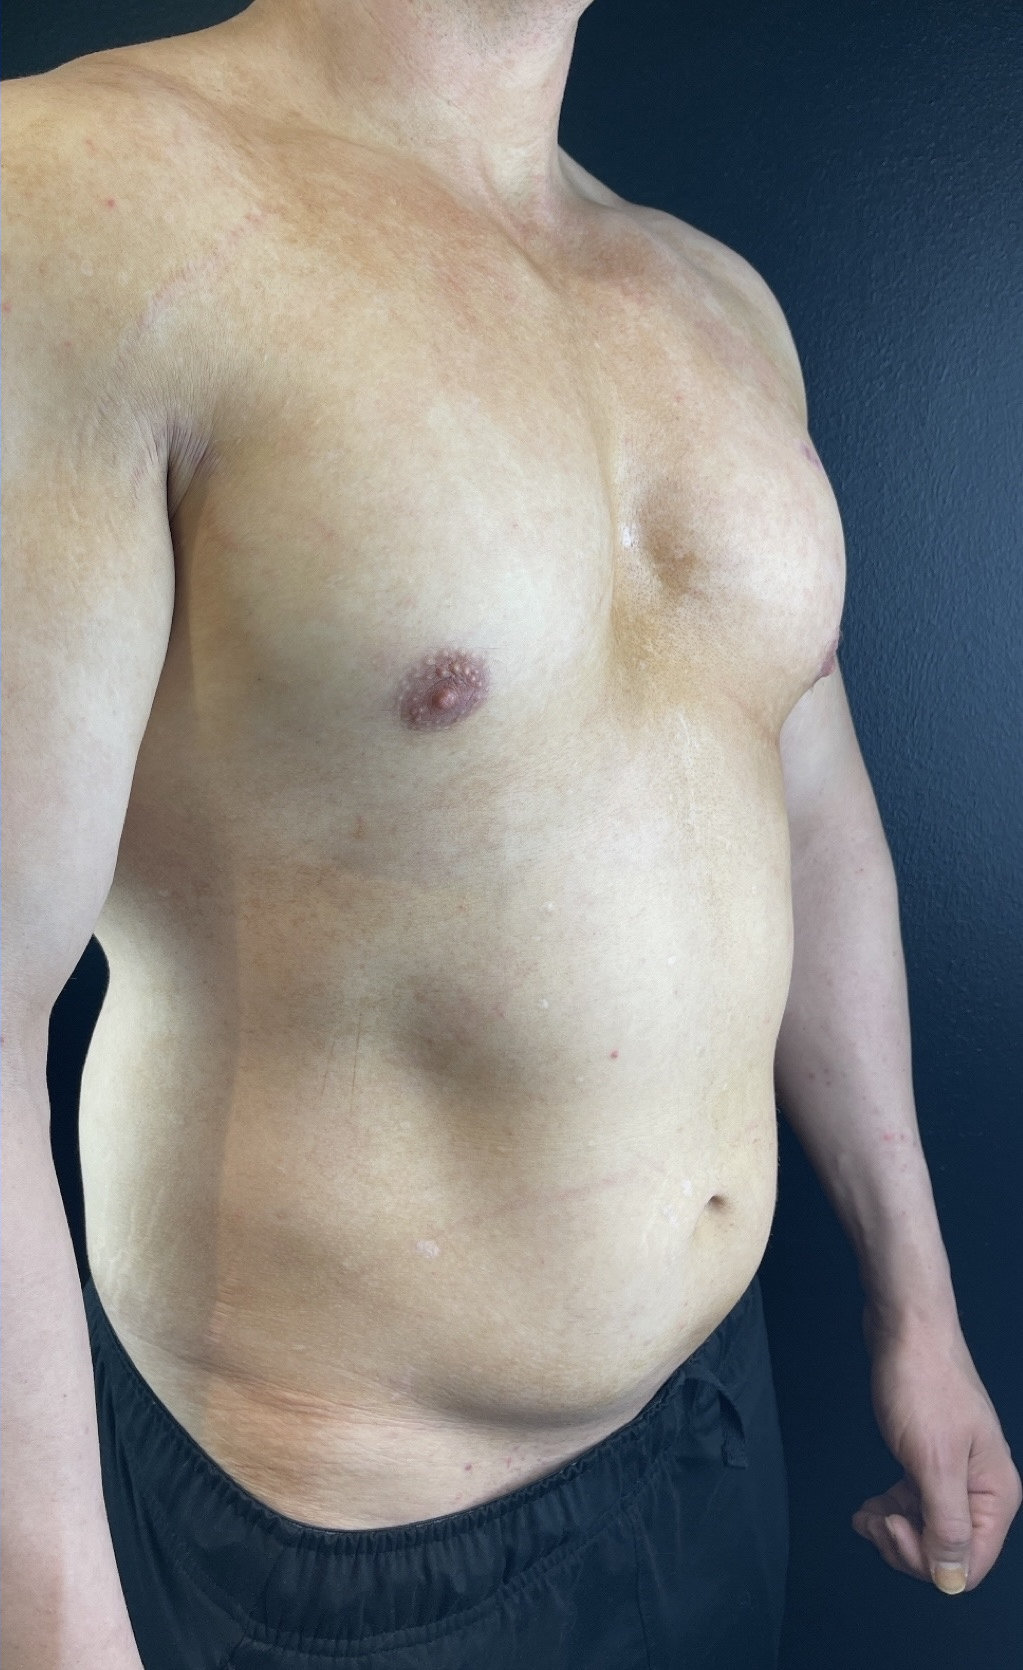 A shirtless man with a pale complexion stands against a dark background, showing his torso and one arm, visible signs of skin blemishes.